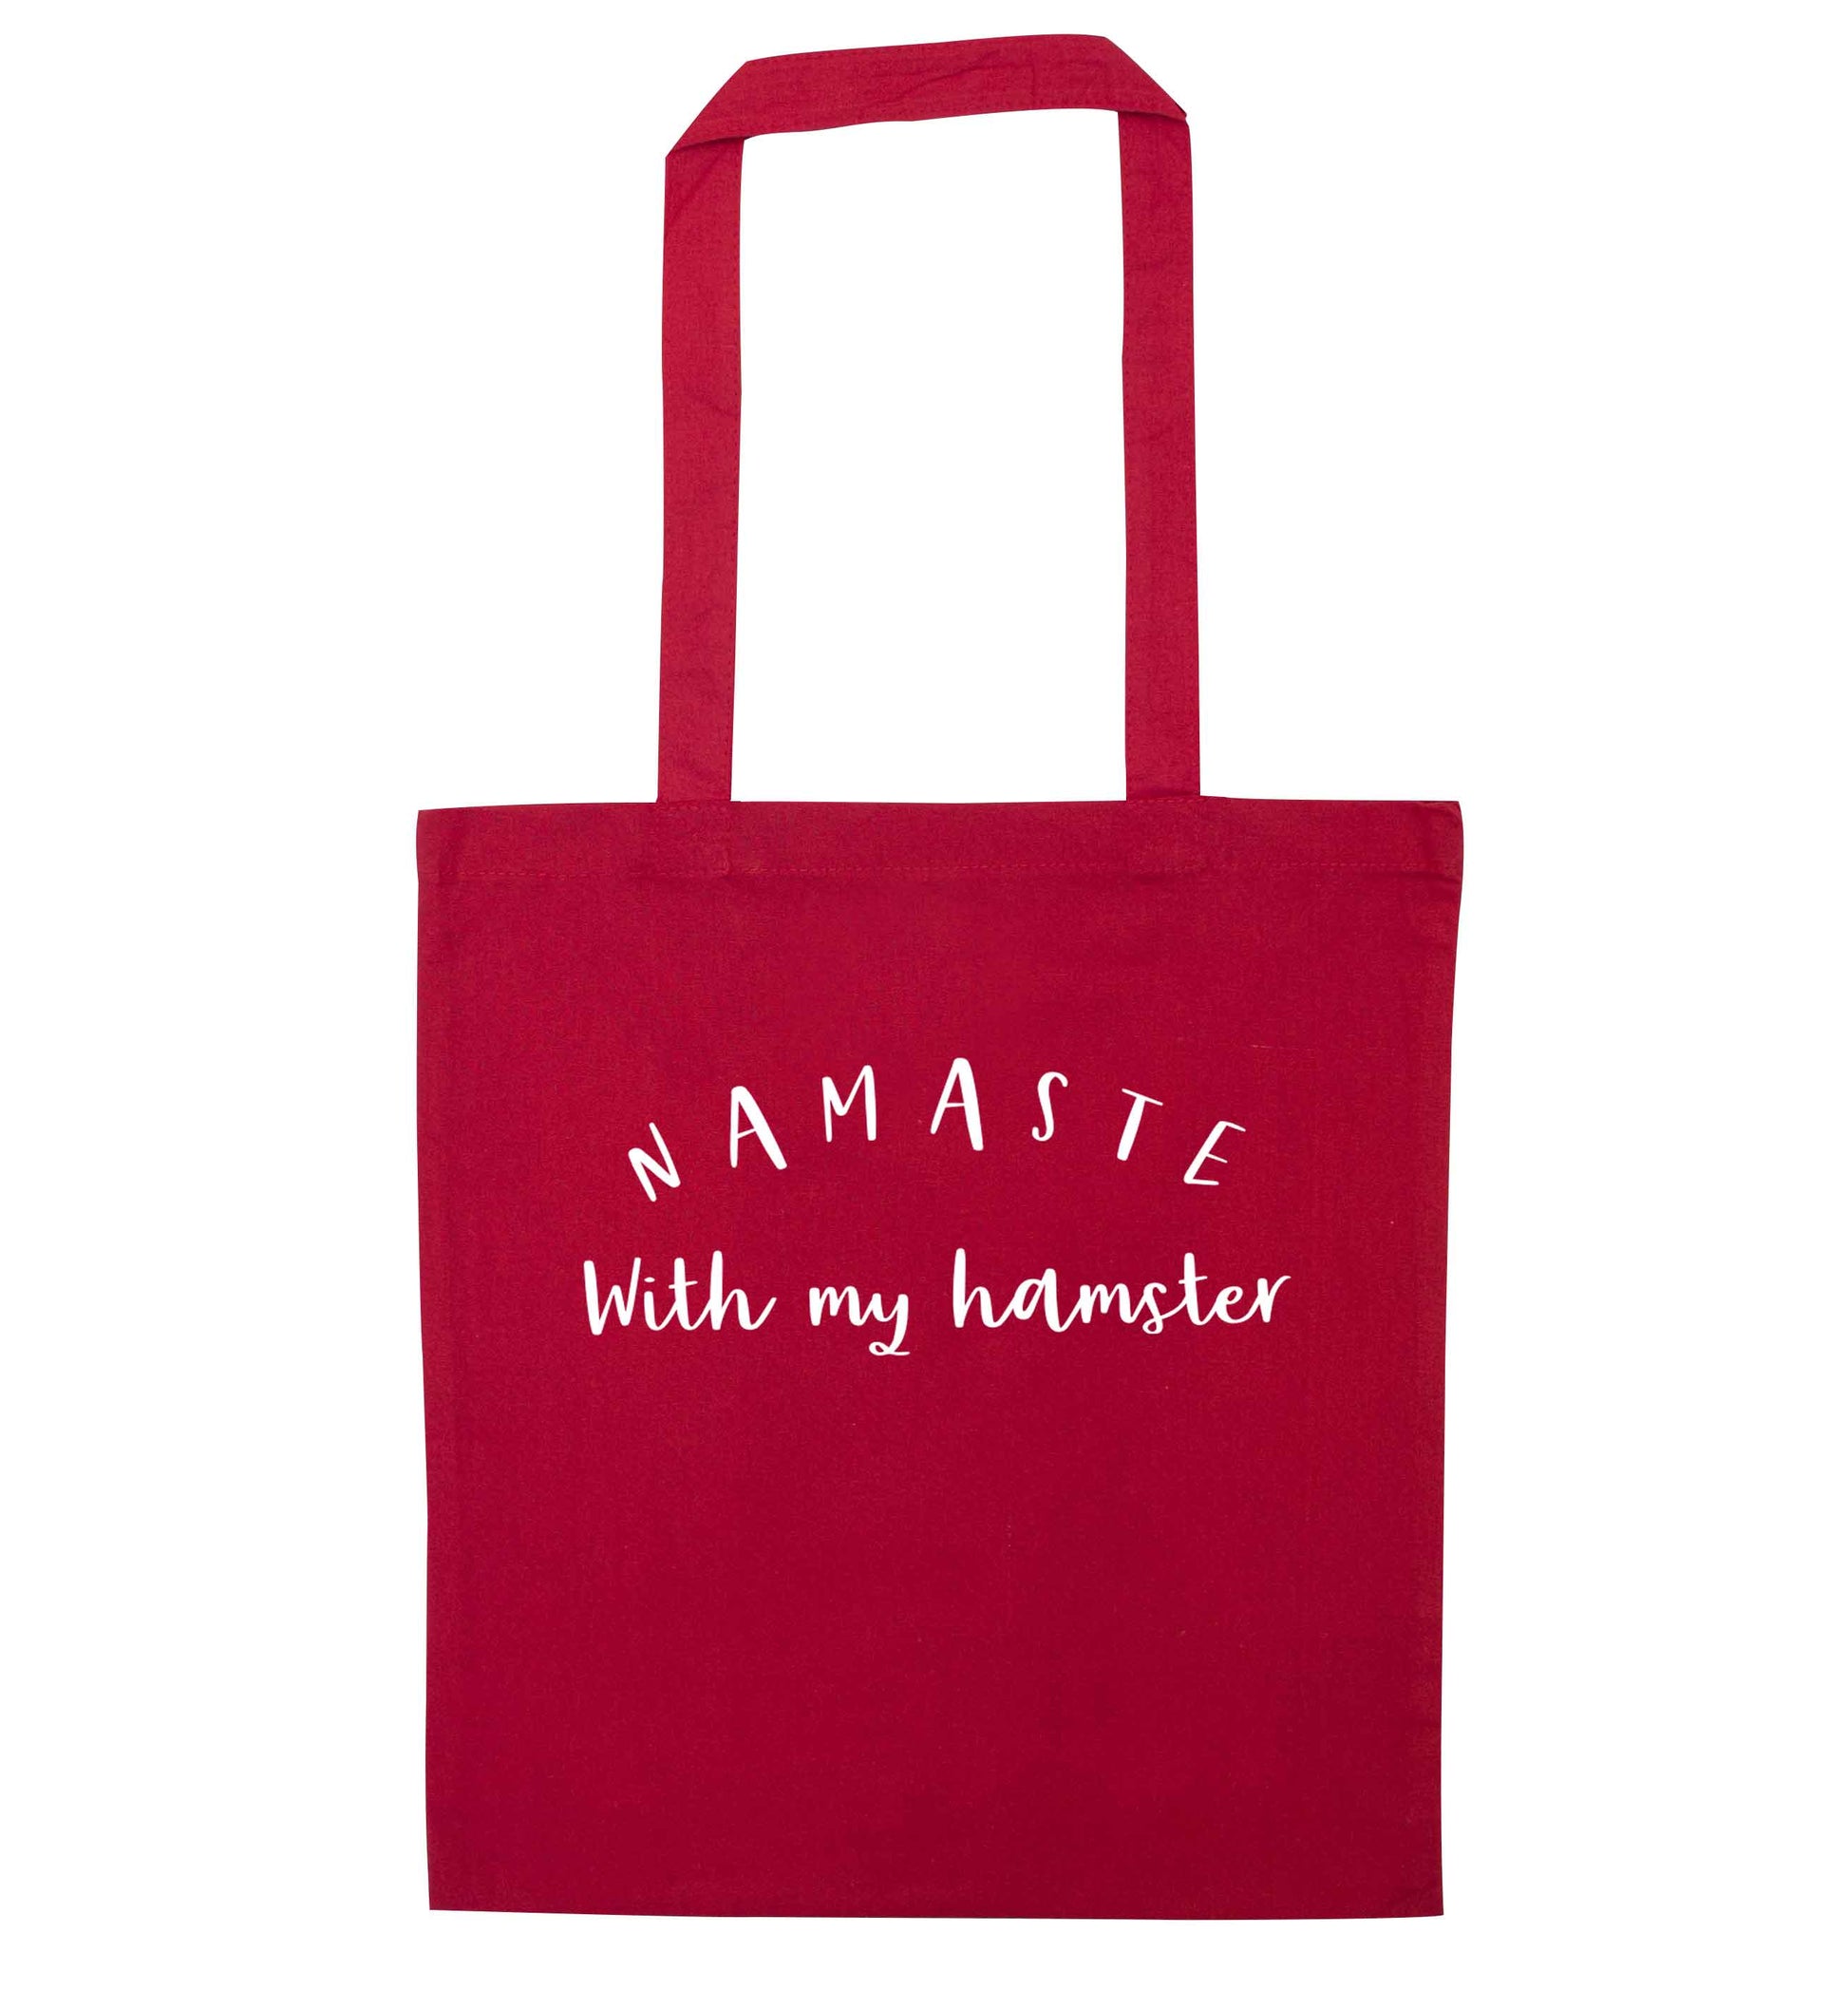 Namaste with my hamster red tote bag